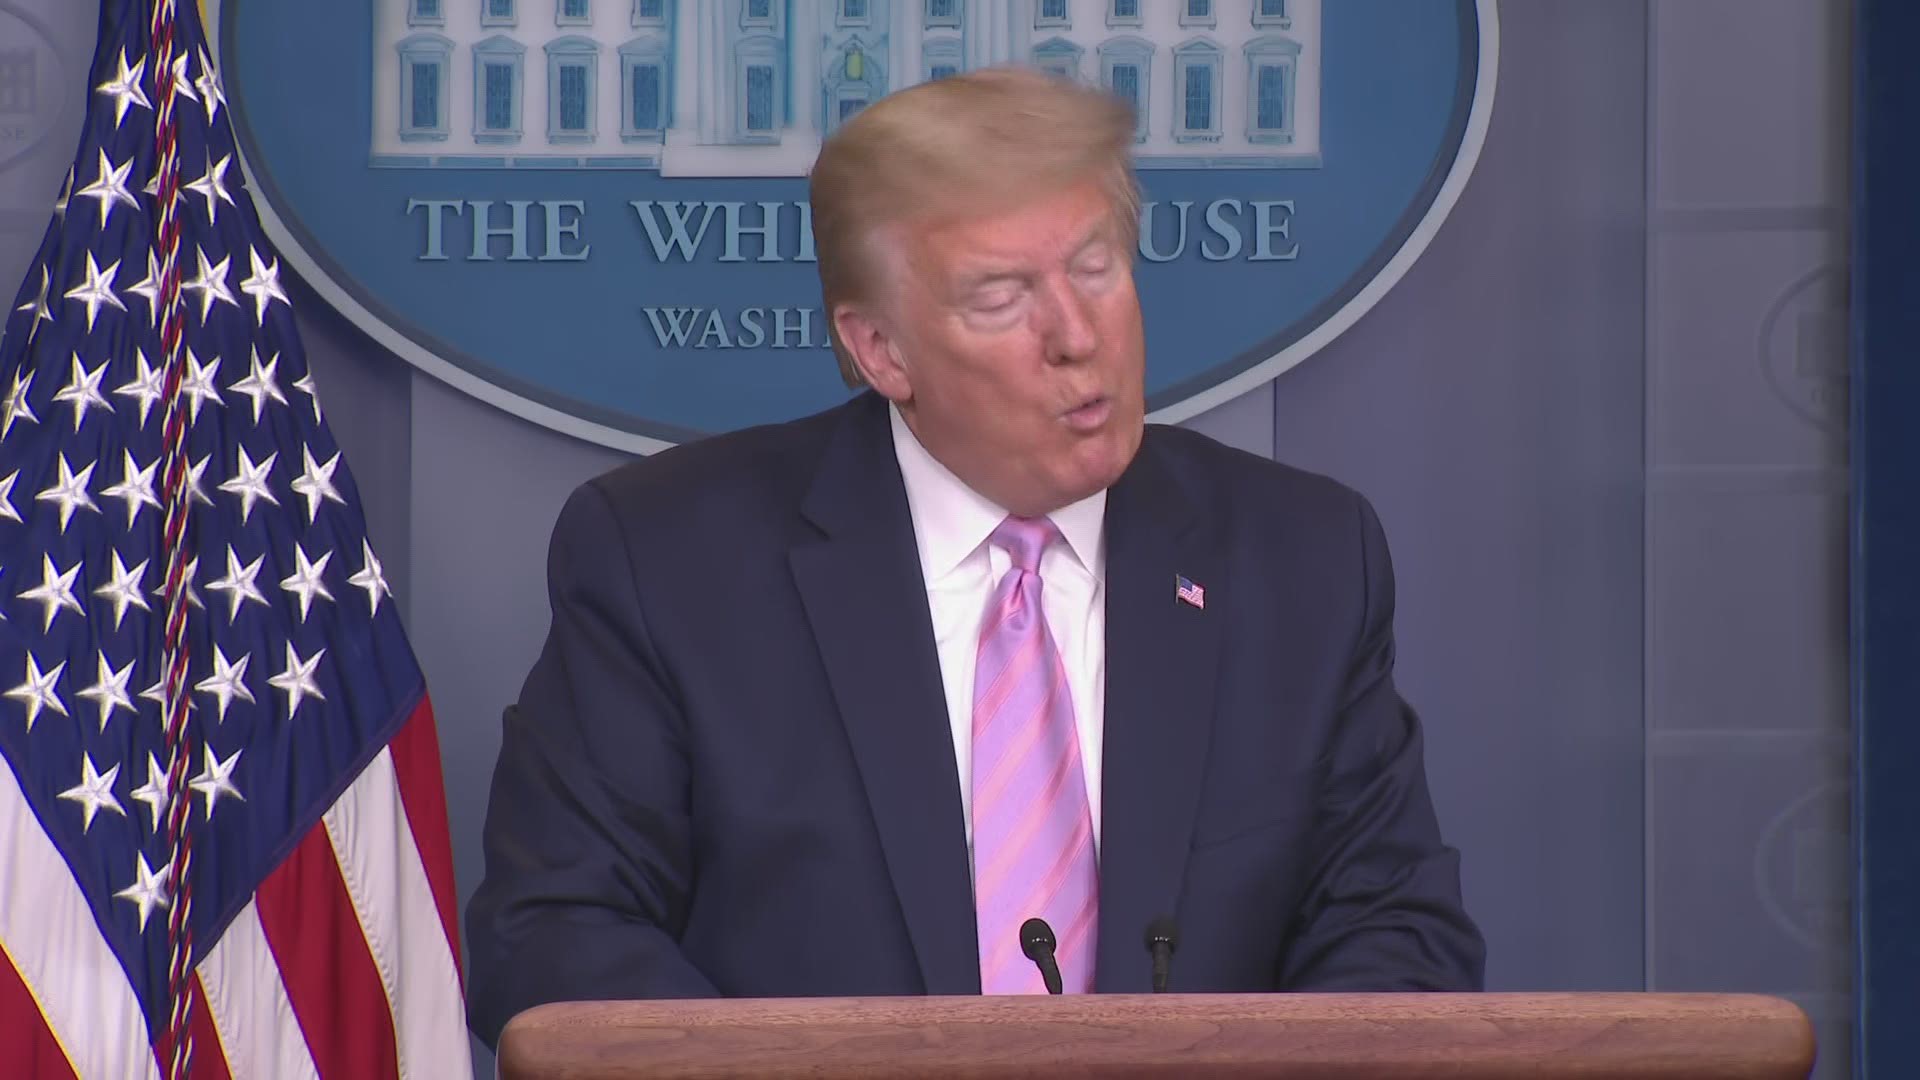 Trump says his decision on whether to reopen the country amid the coronavirus pandemic is his biggest yet. He says he'll surround himself with the greatest minds.